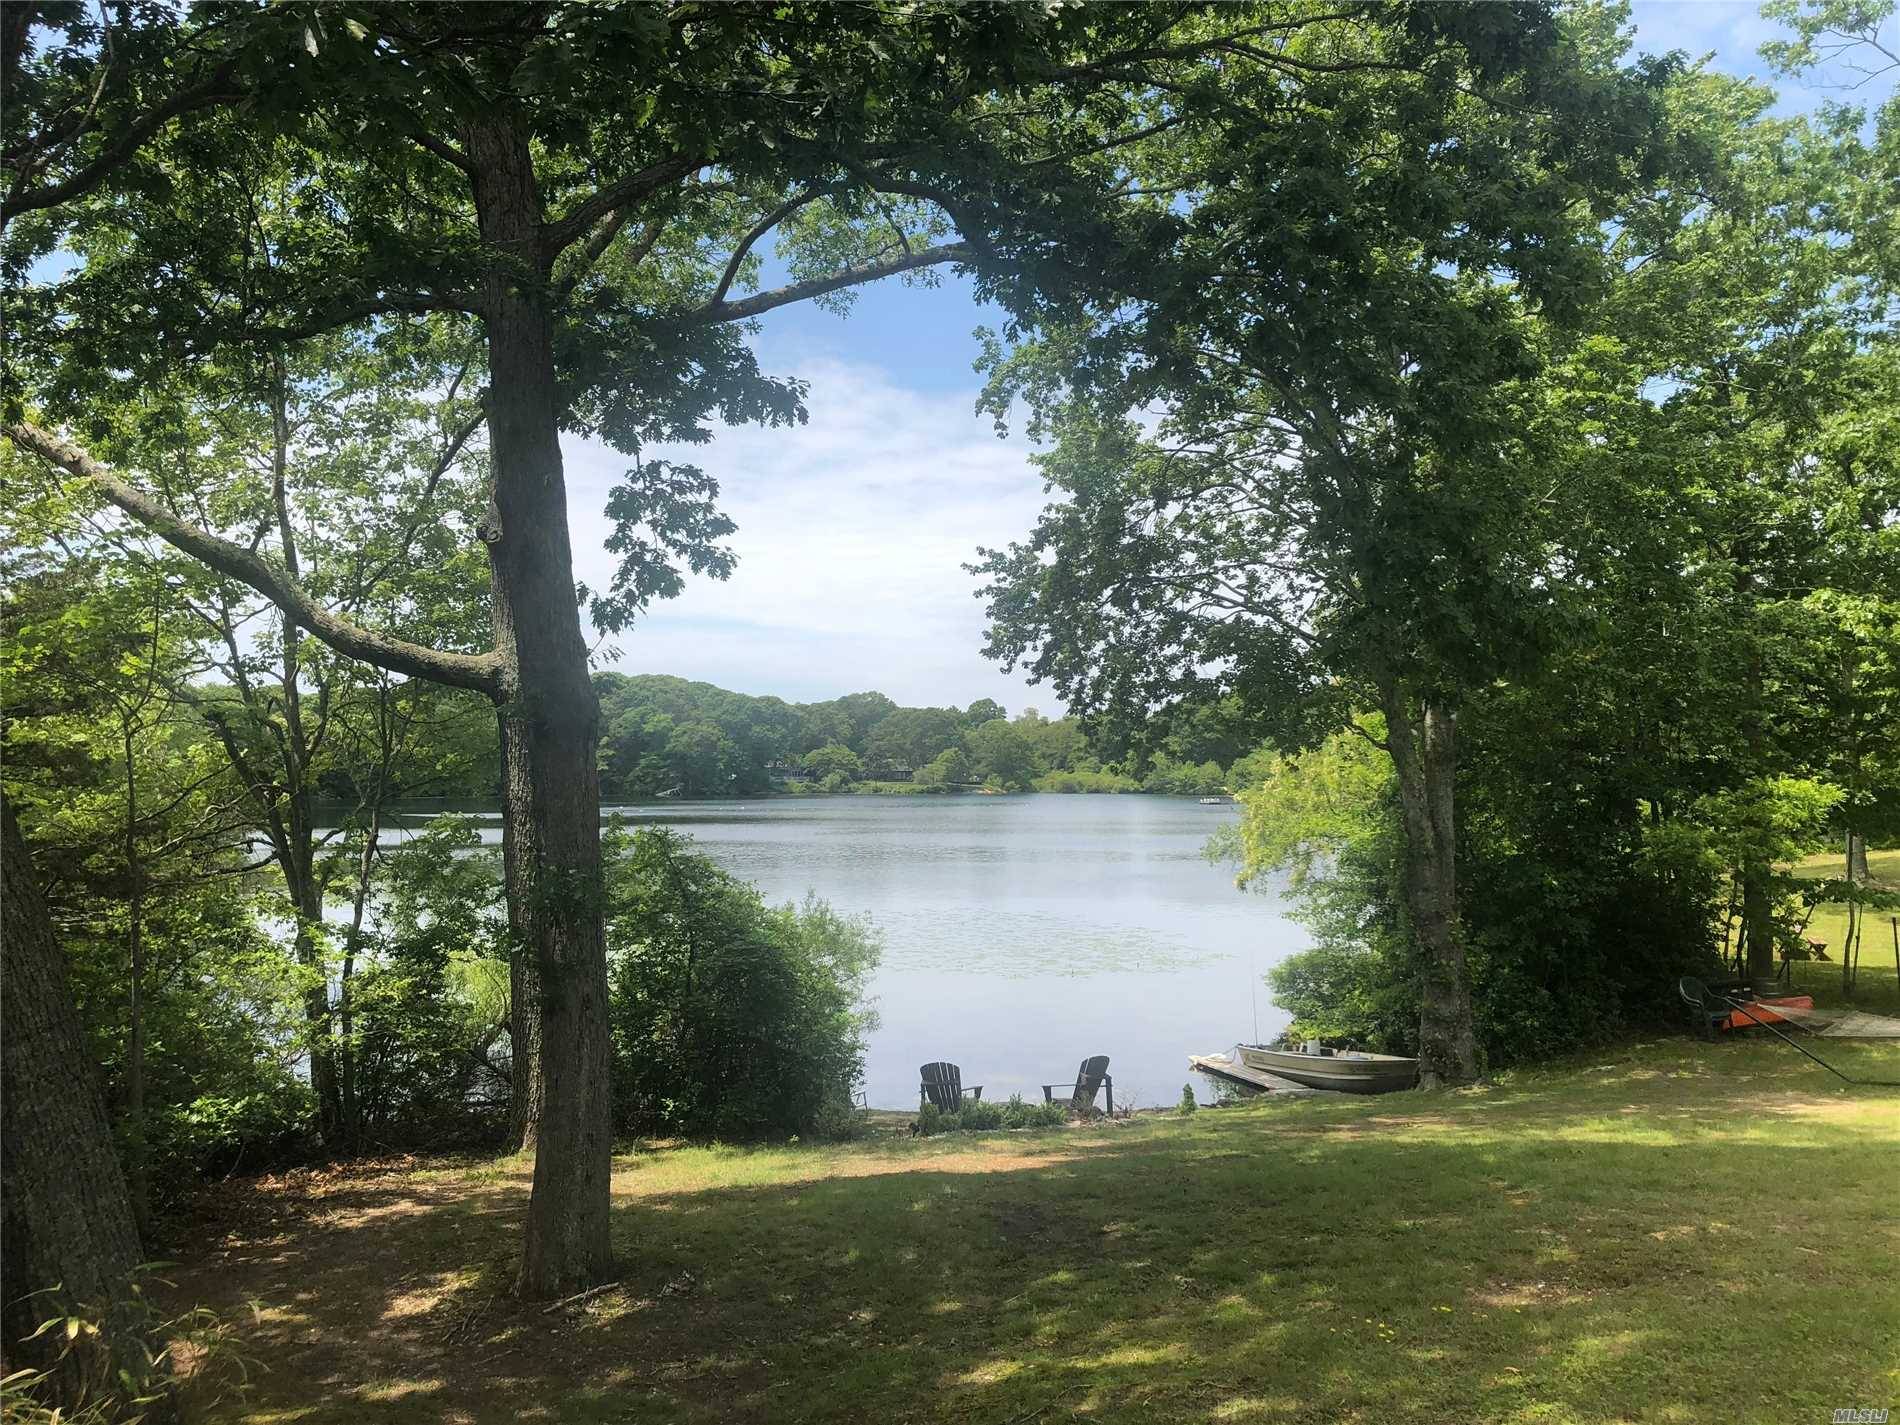 Enjoy stunning waterfront sunsets, surrounded by nature, from this quaint 2BR, 1BA cottage on Shelter Island's lake, known as Fresh Pond.